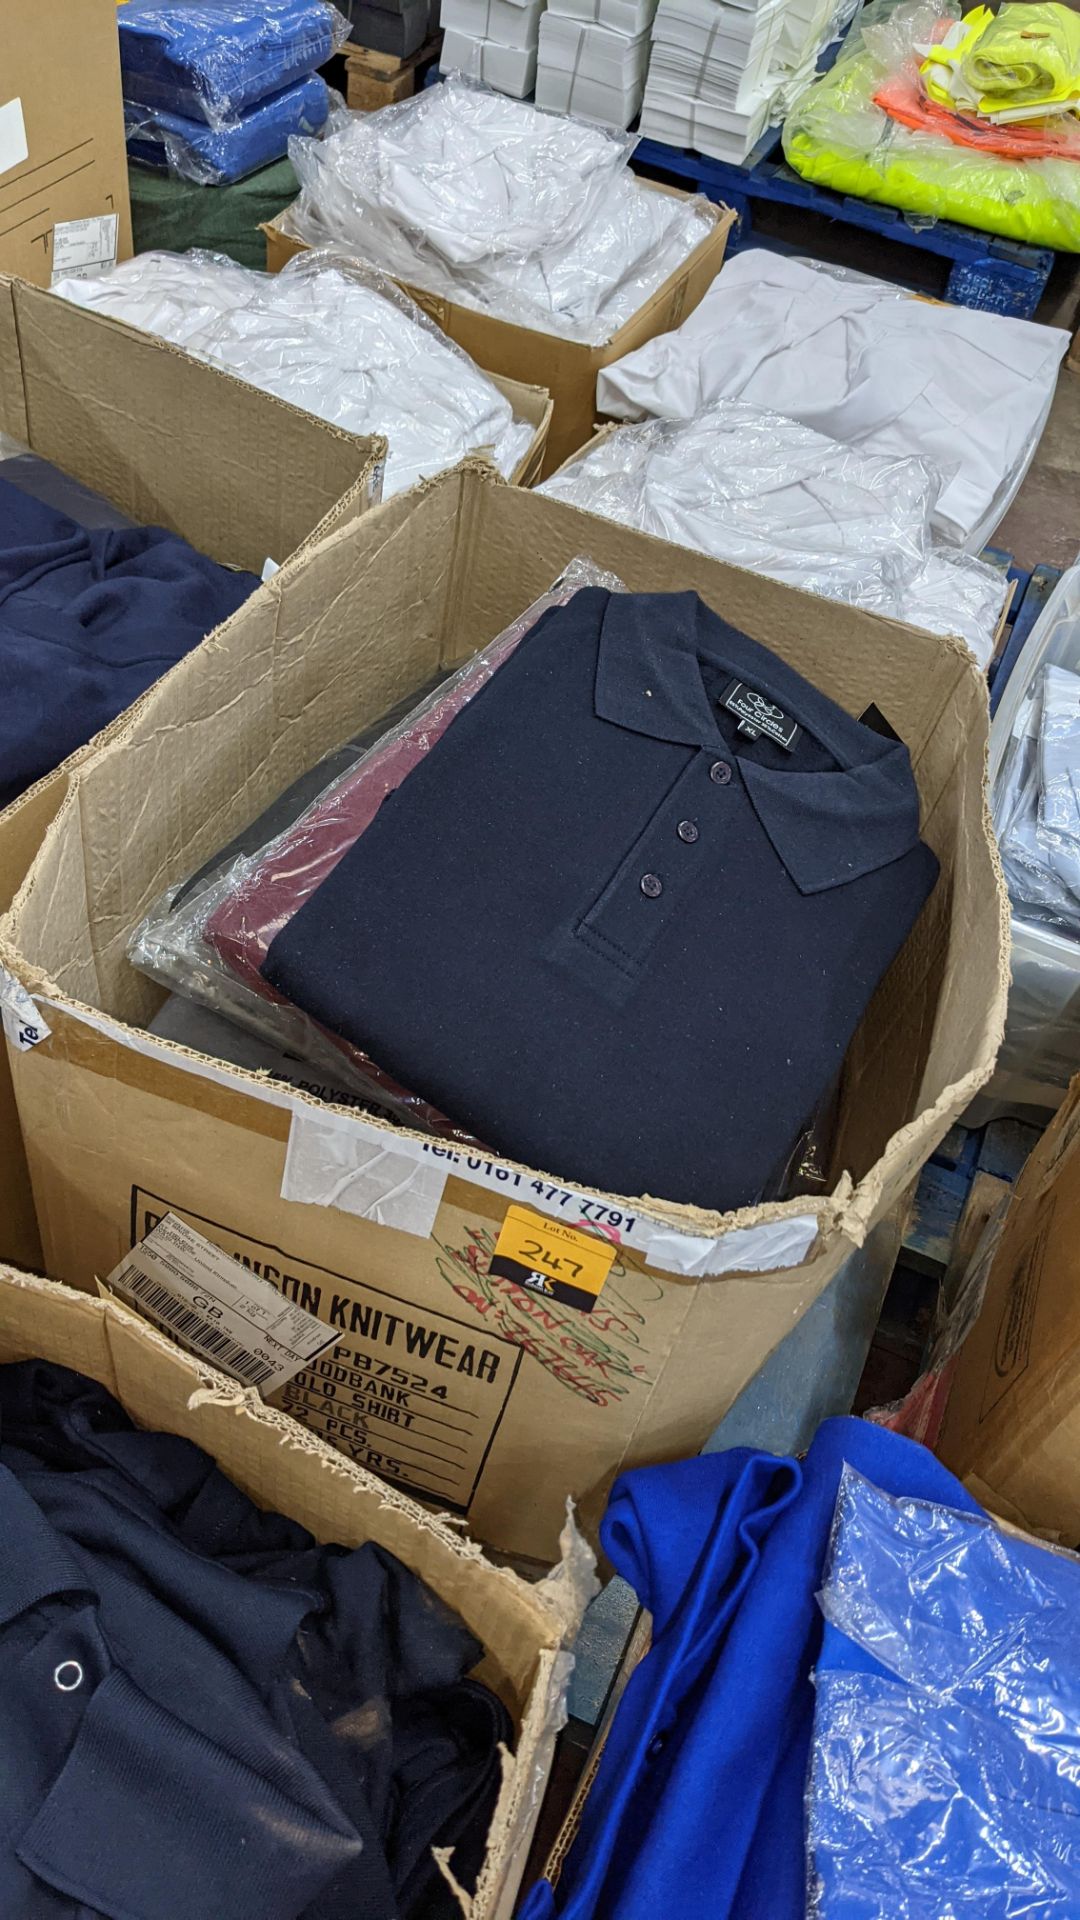 Approx 17 off assorted polo shirts by Four Circles in blue, burgundy & grey - 1 large box